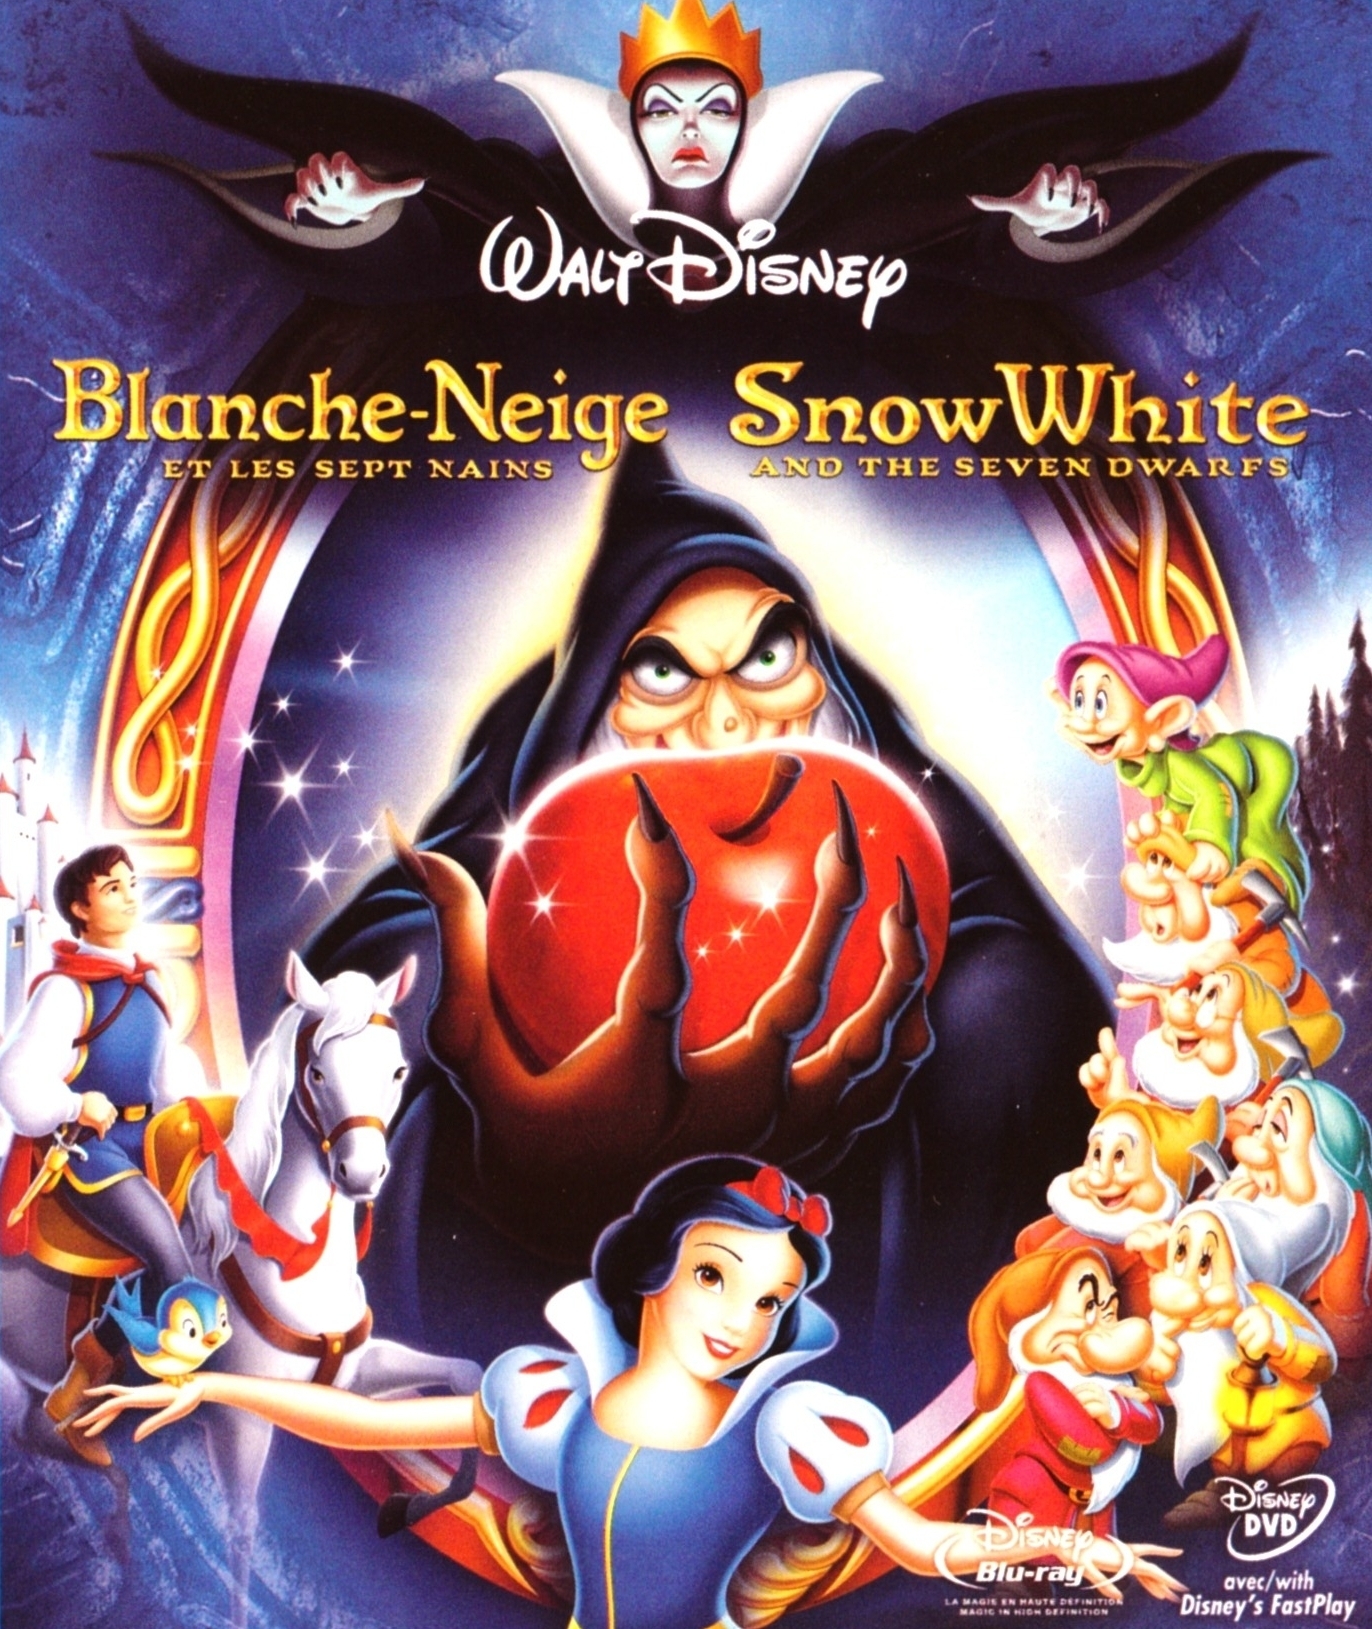 Blanche-Neige et les sept nains - Disney Blu-ray 4-1-1